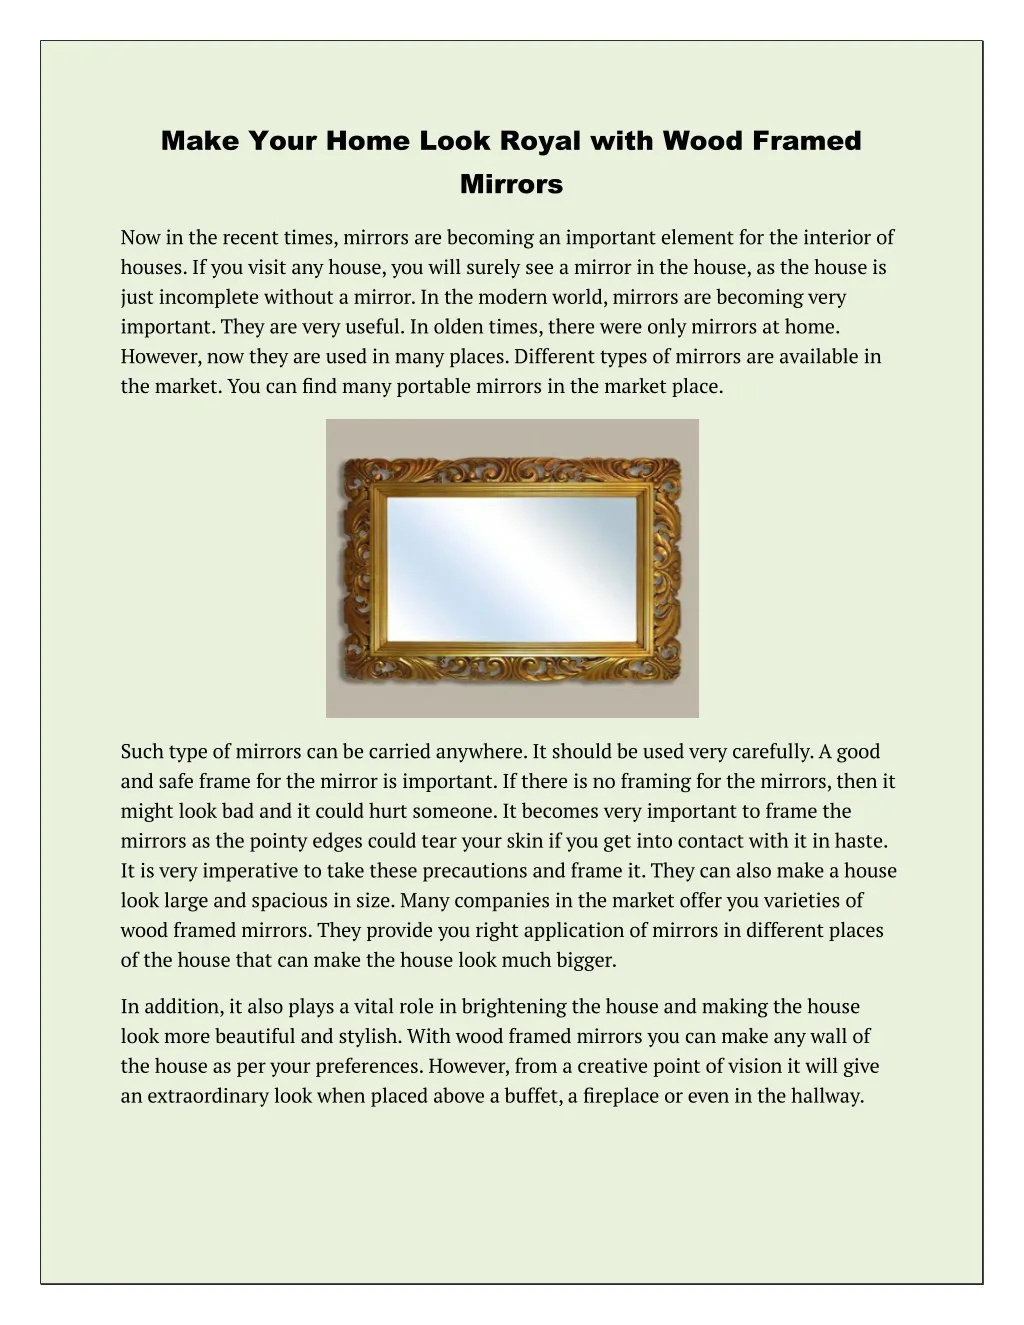 make your home look royal with wood framed mirrors